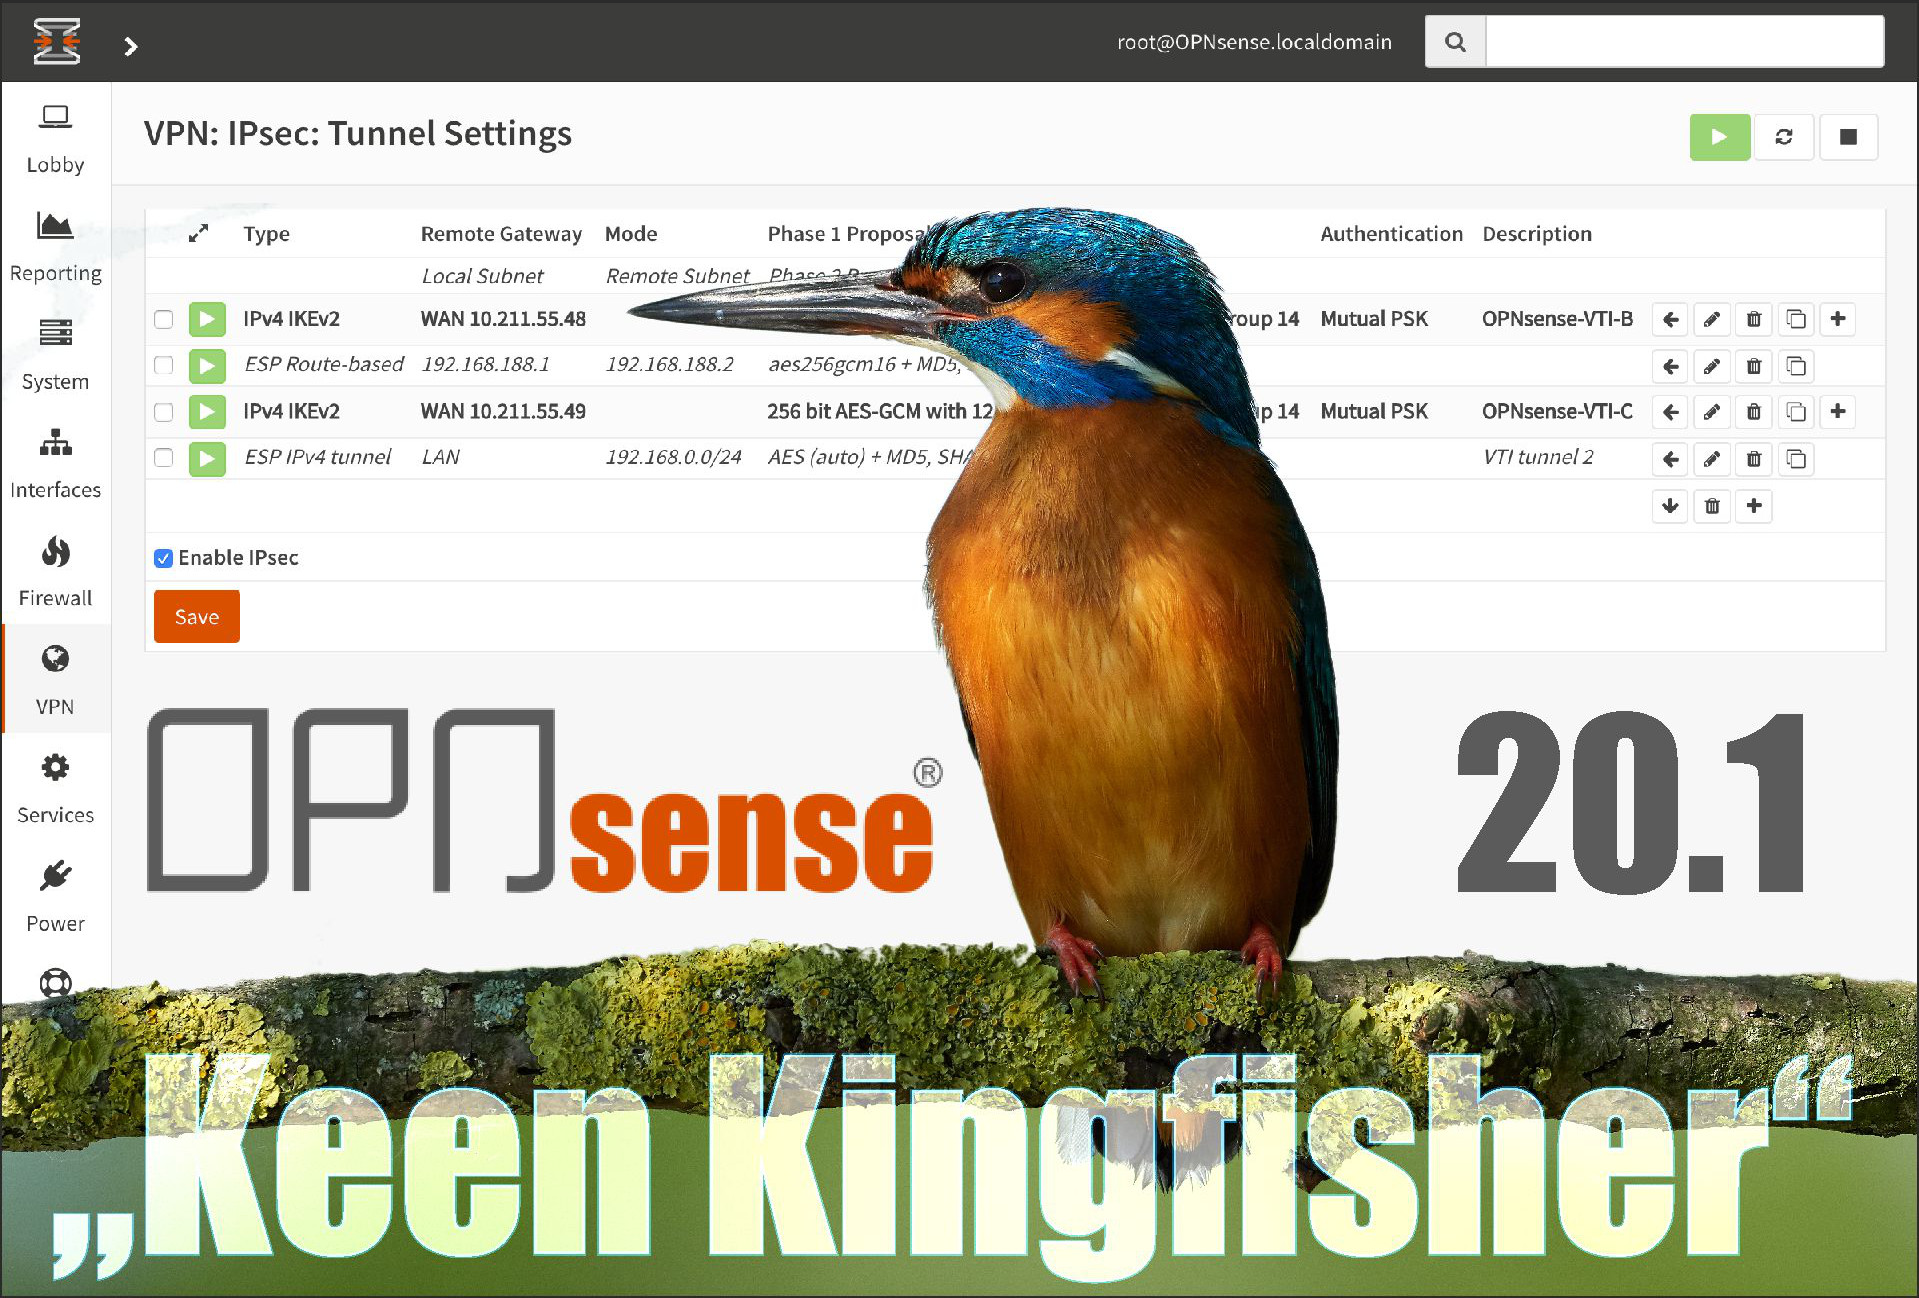 OPNsense® “Keen Kingfisher” marks project’s 5-year anniversary